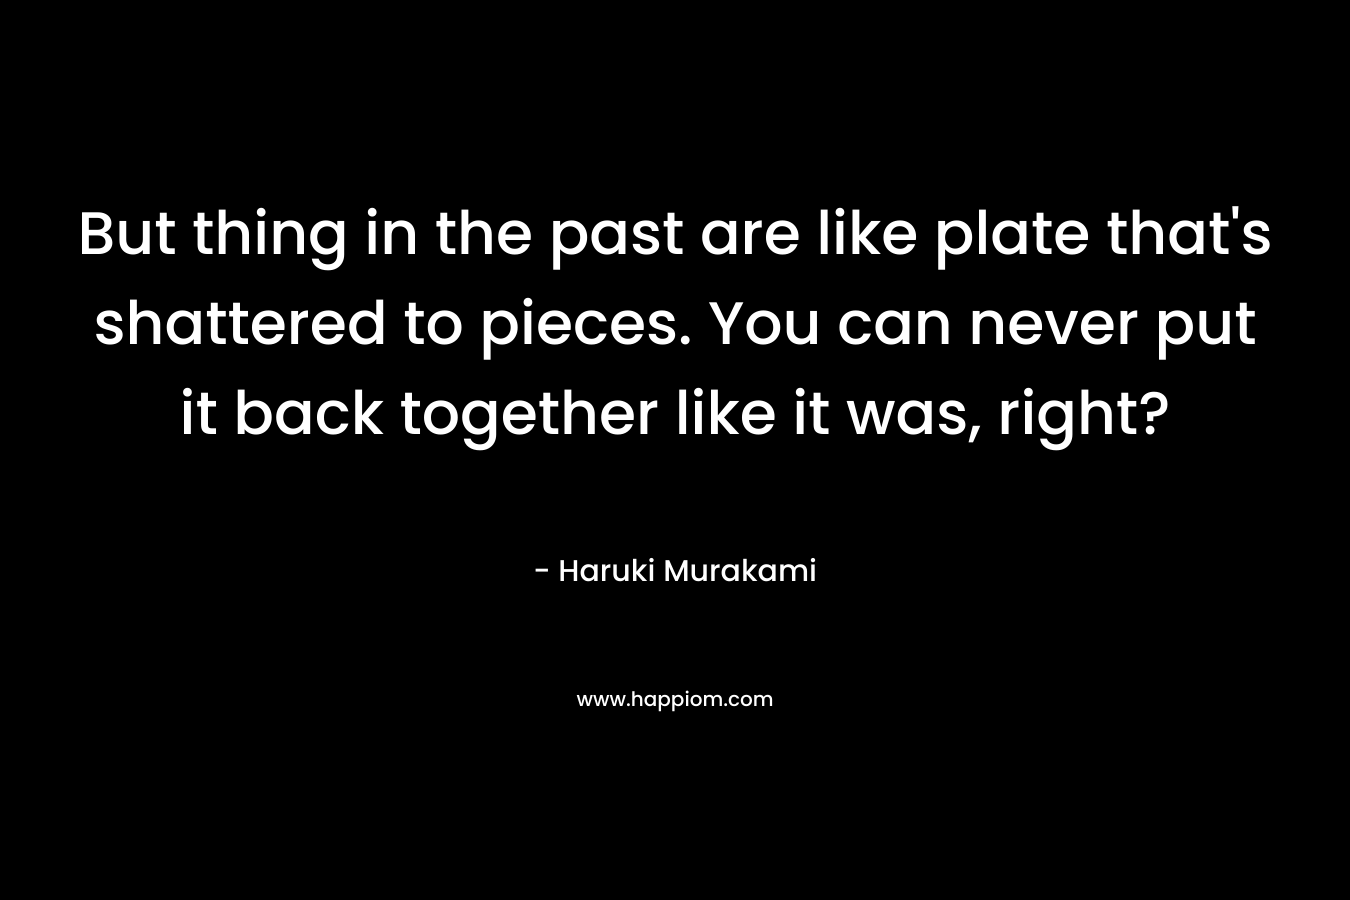 But thing in the past are like plate that's shattered to pieces. You can never put it back together like it was, right?